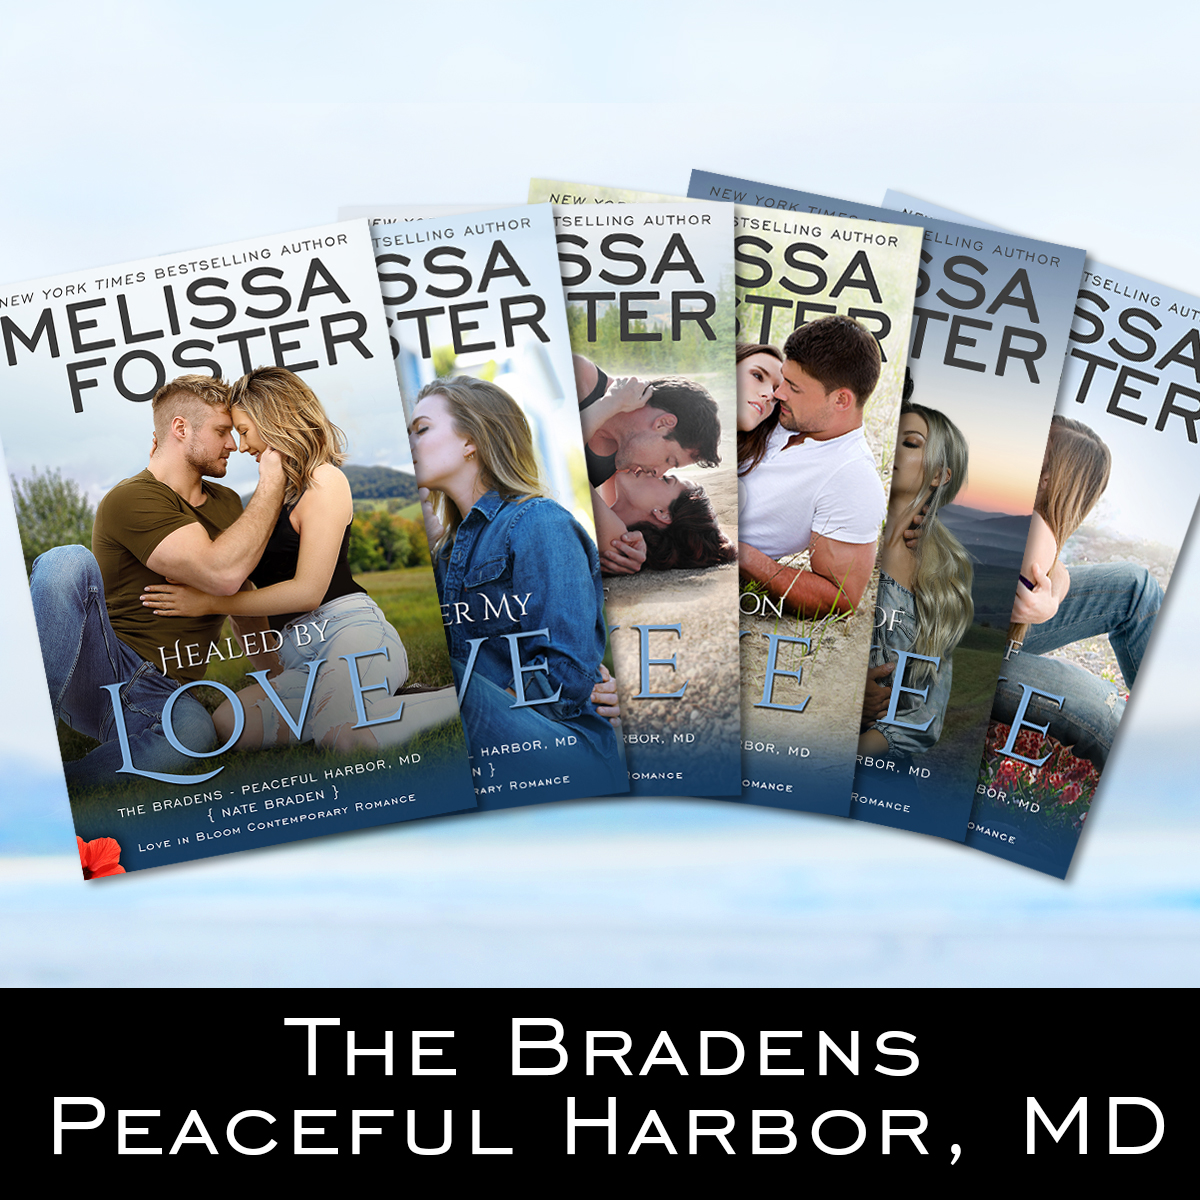 The Bradens at Peaceful Harbor by Melissa Foster